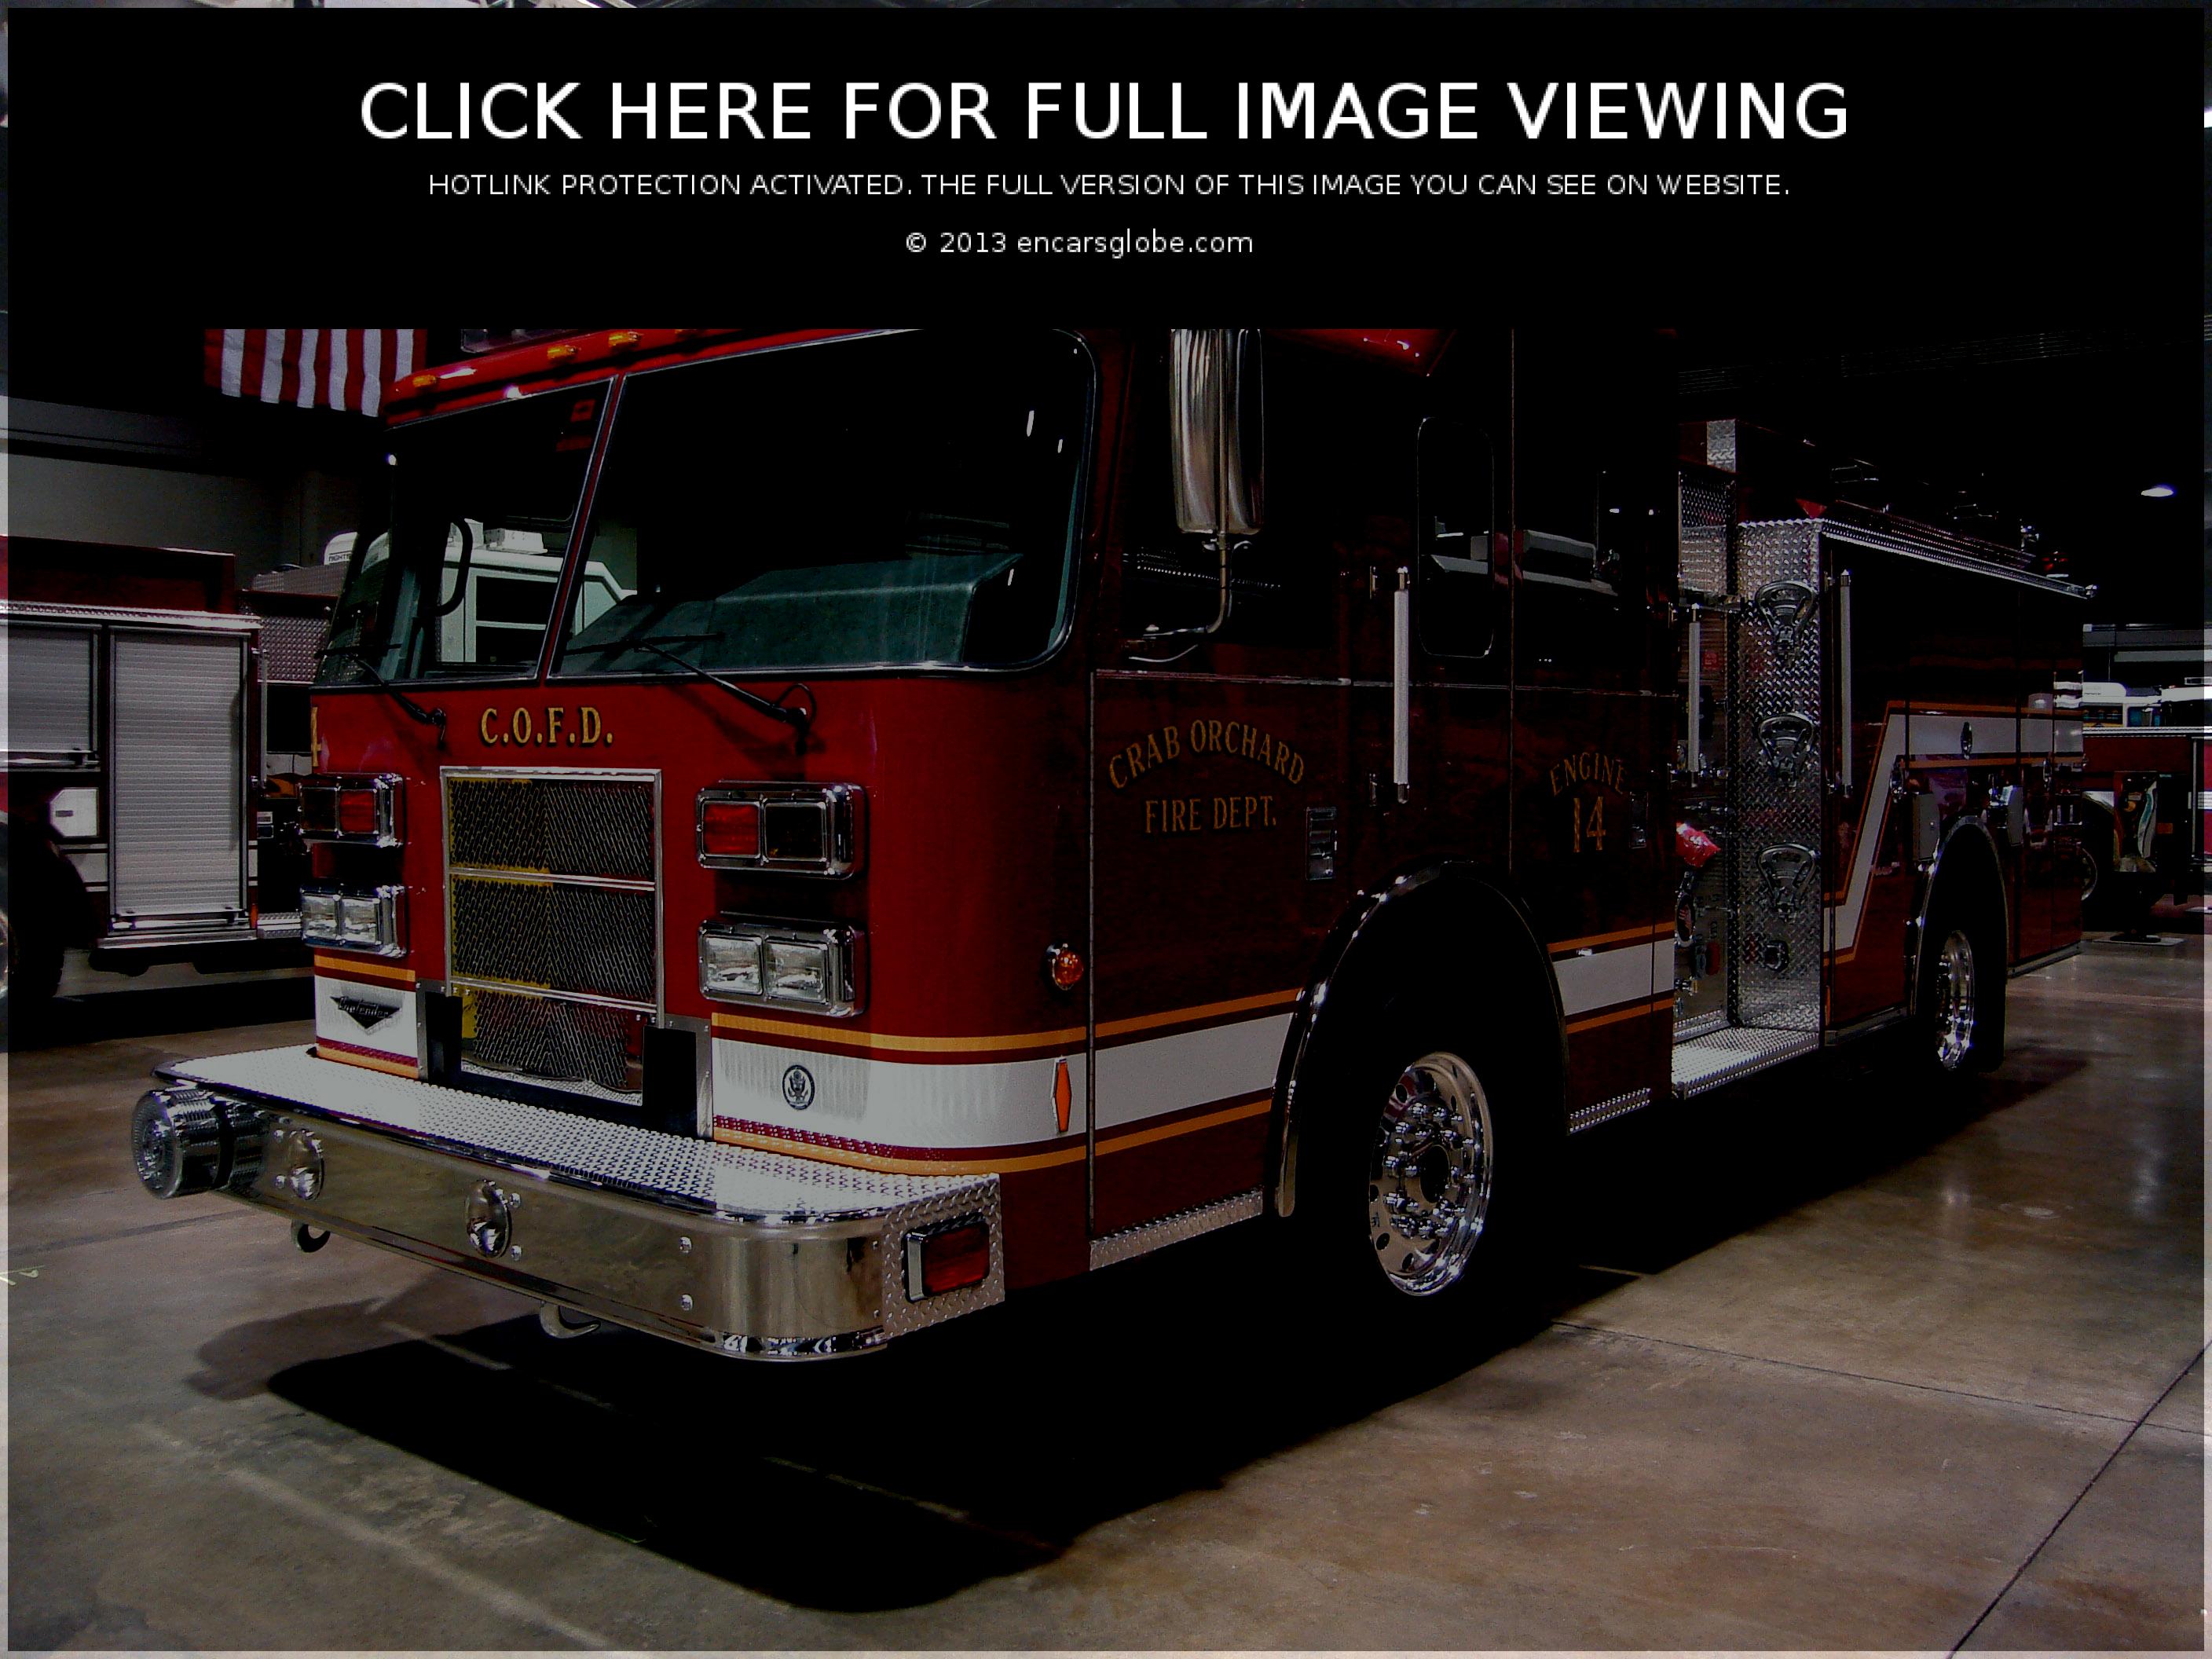 Pierce Model 1000 Pumper Photo Gallery: Photo #12 out of 6, Image ...